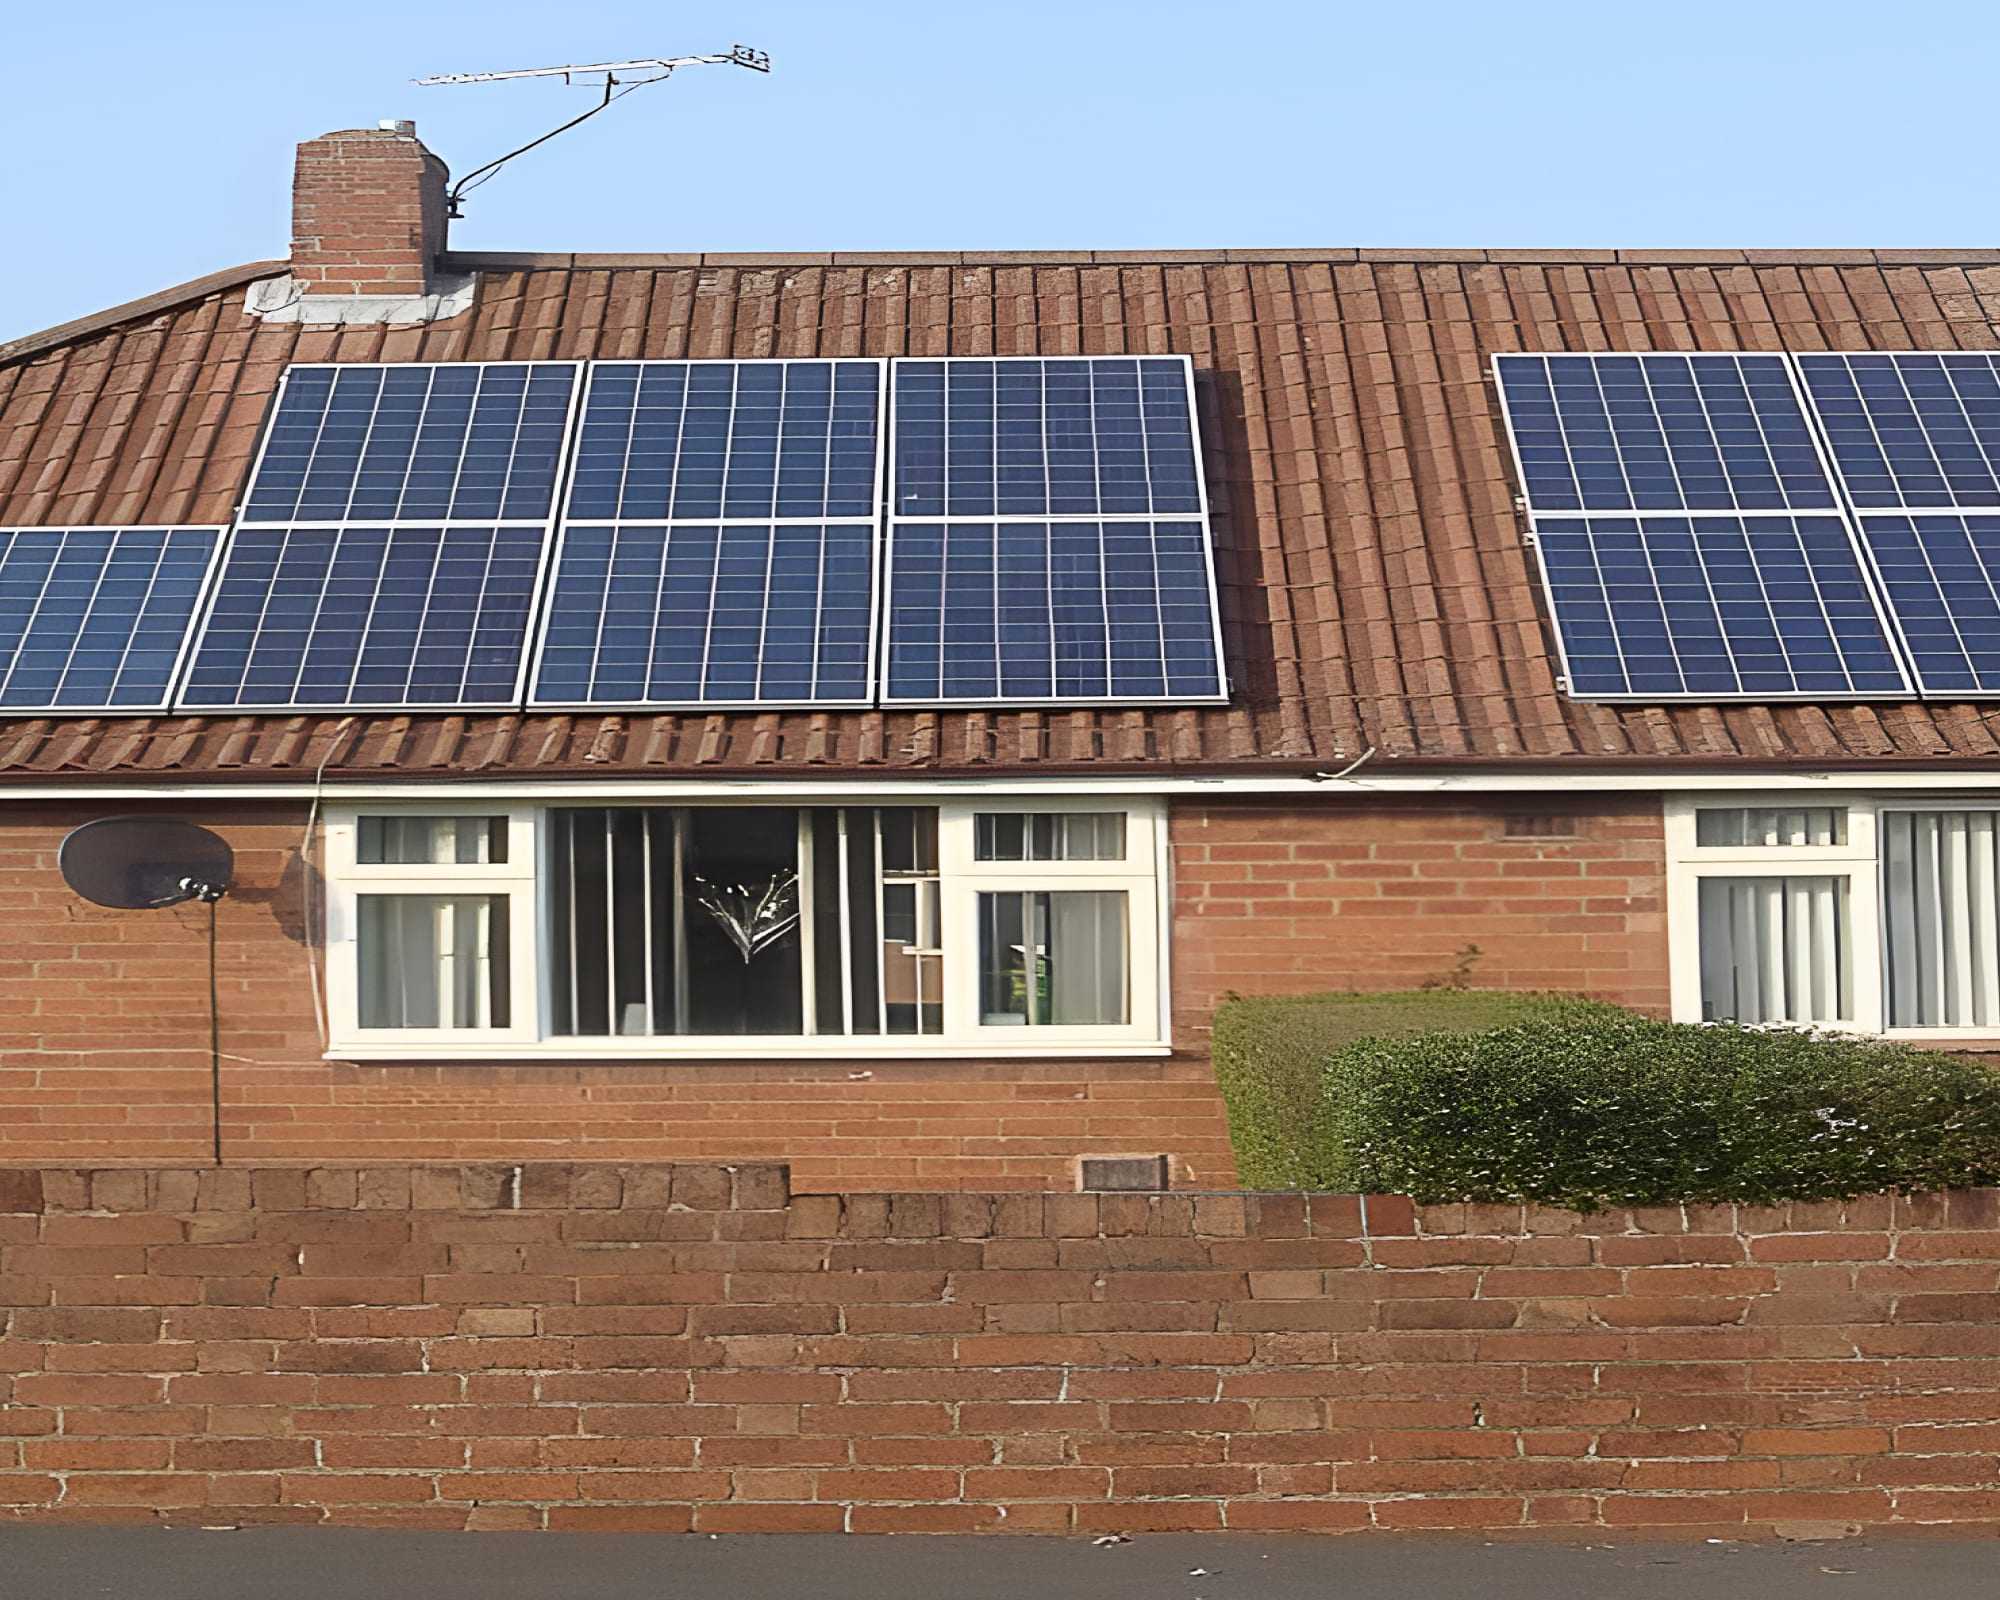 A bungalow with solar panels.